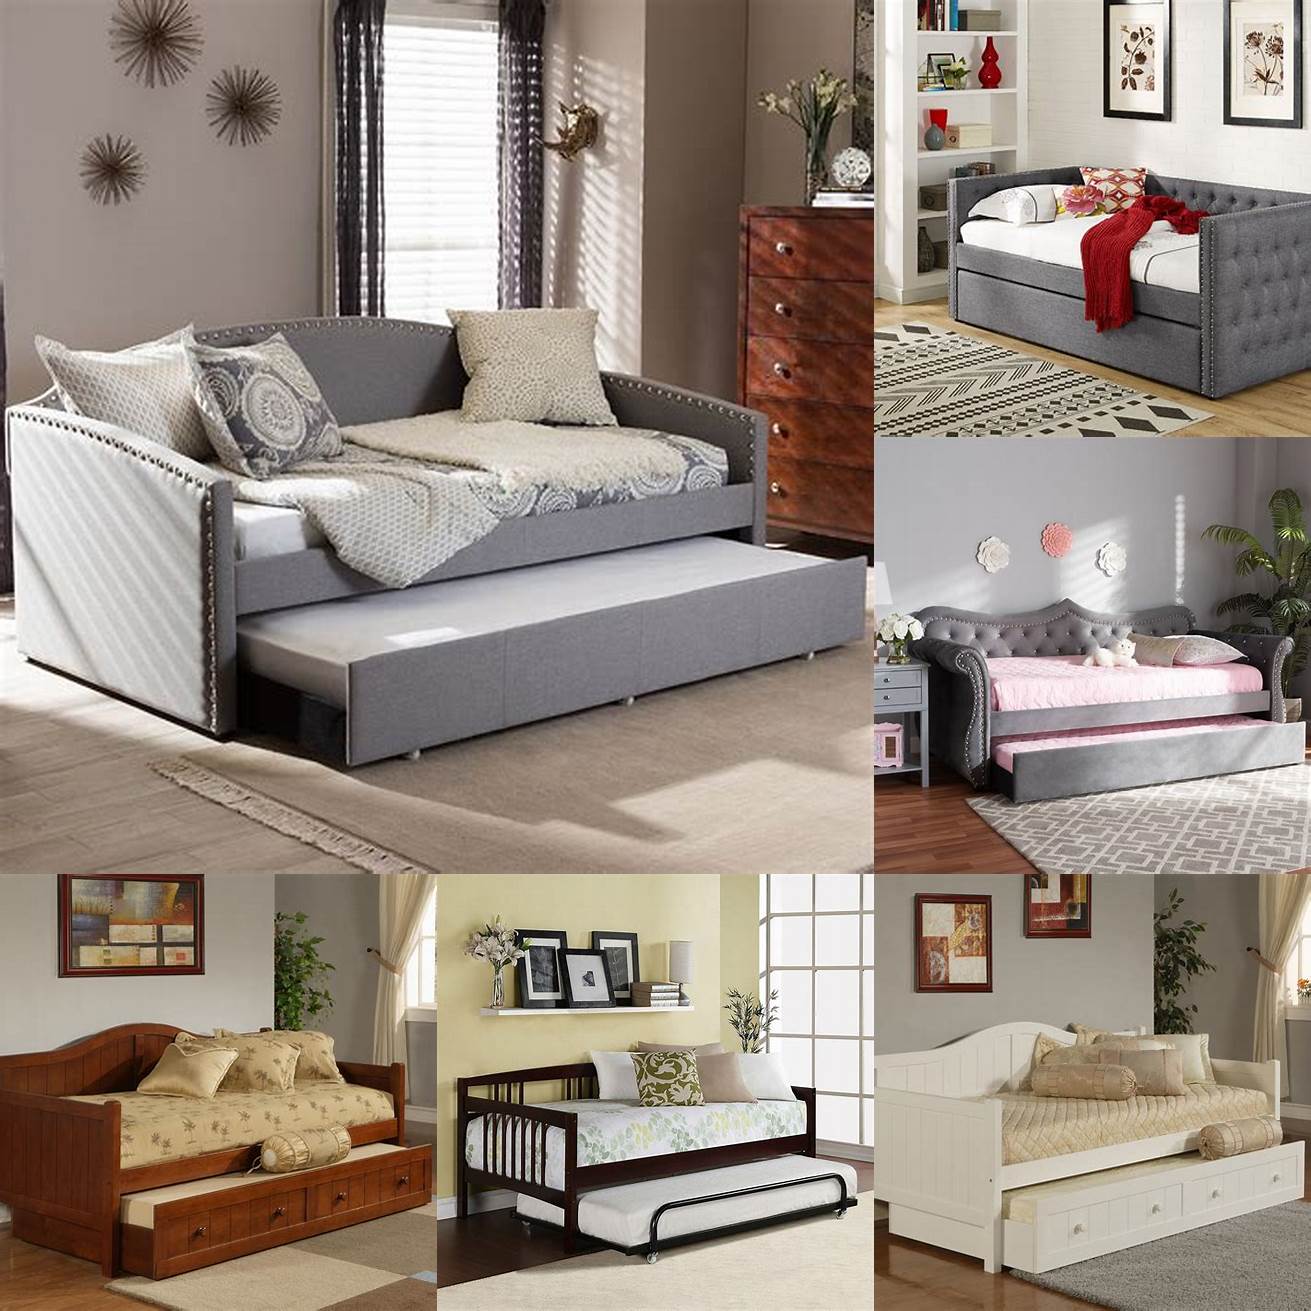 Daybeds with trundle This type of bed features a twin-size trundle bed that can be used as a sofa or a daybed during the day It is perfect for small living rooms or studio apartments